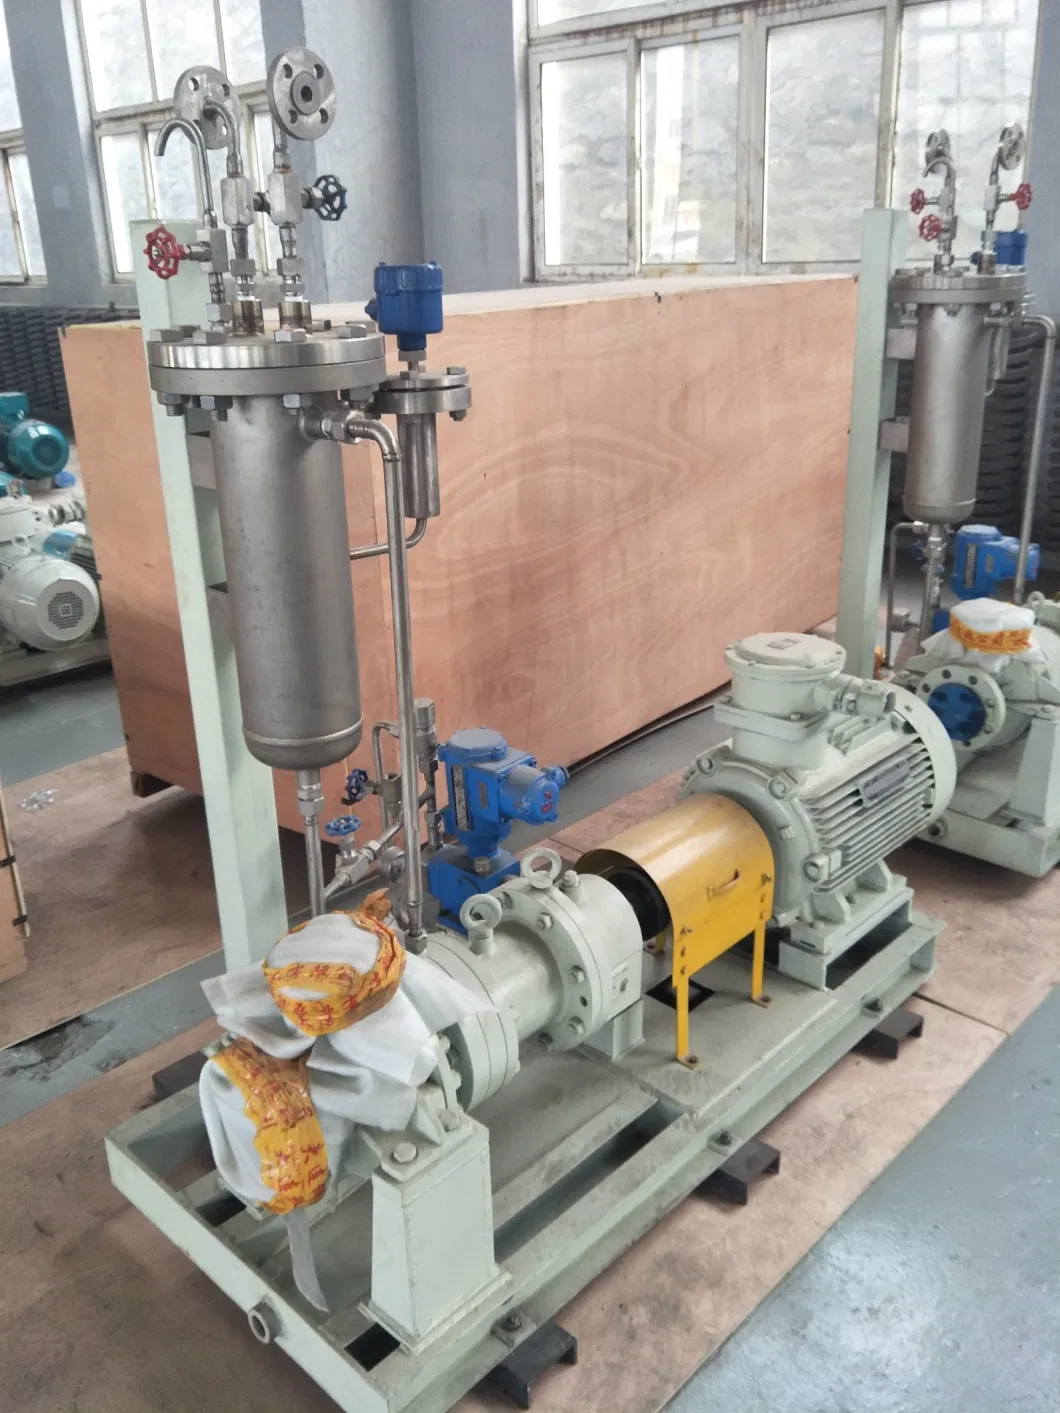 Cq No Leakage Horizontal Flammable Anti-Corrosion Liquid Centrifugal Stainless Steel Acid Alkali Resistant Magnetic Drive Ex-Proof Chemical Pump